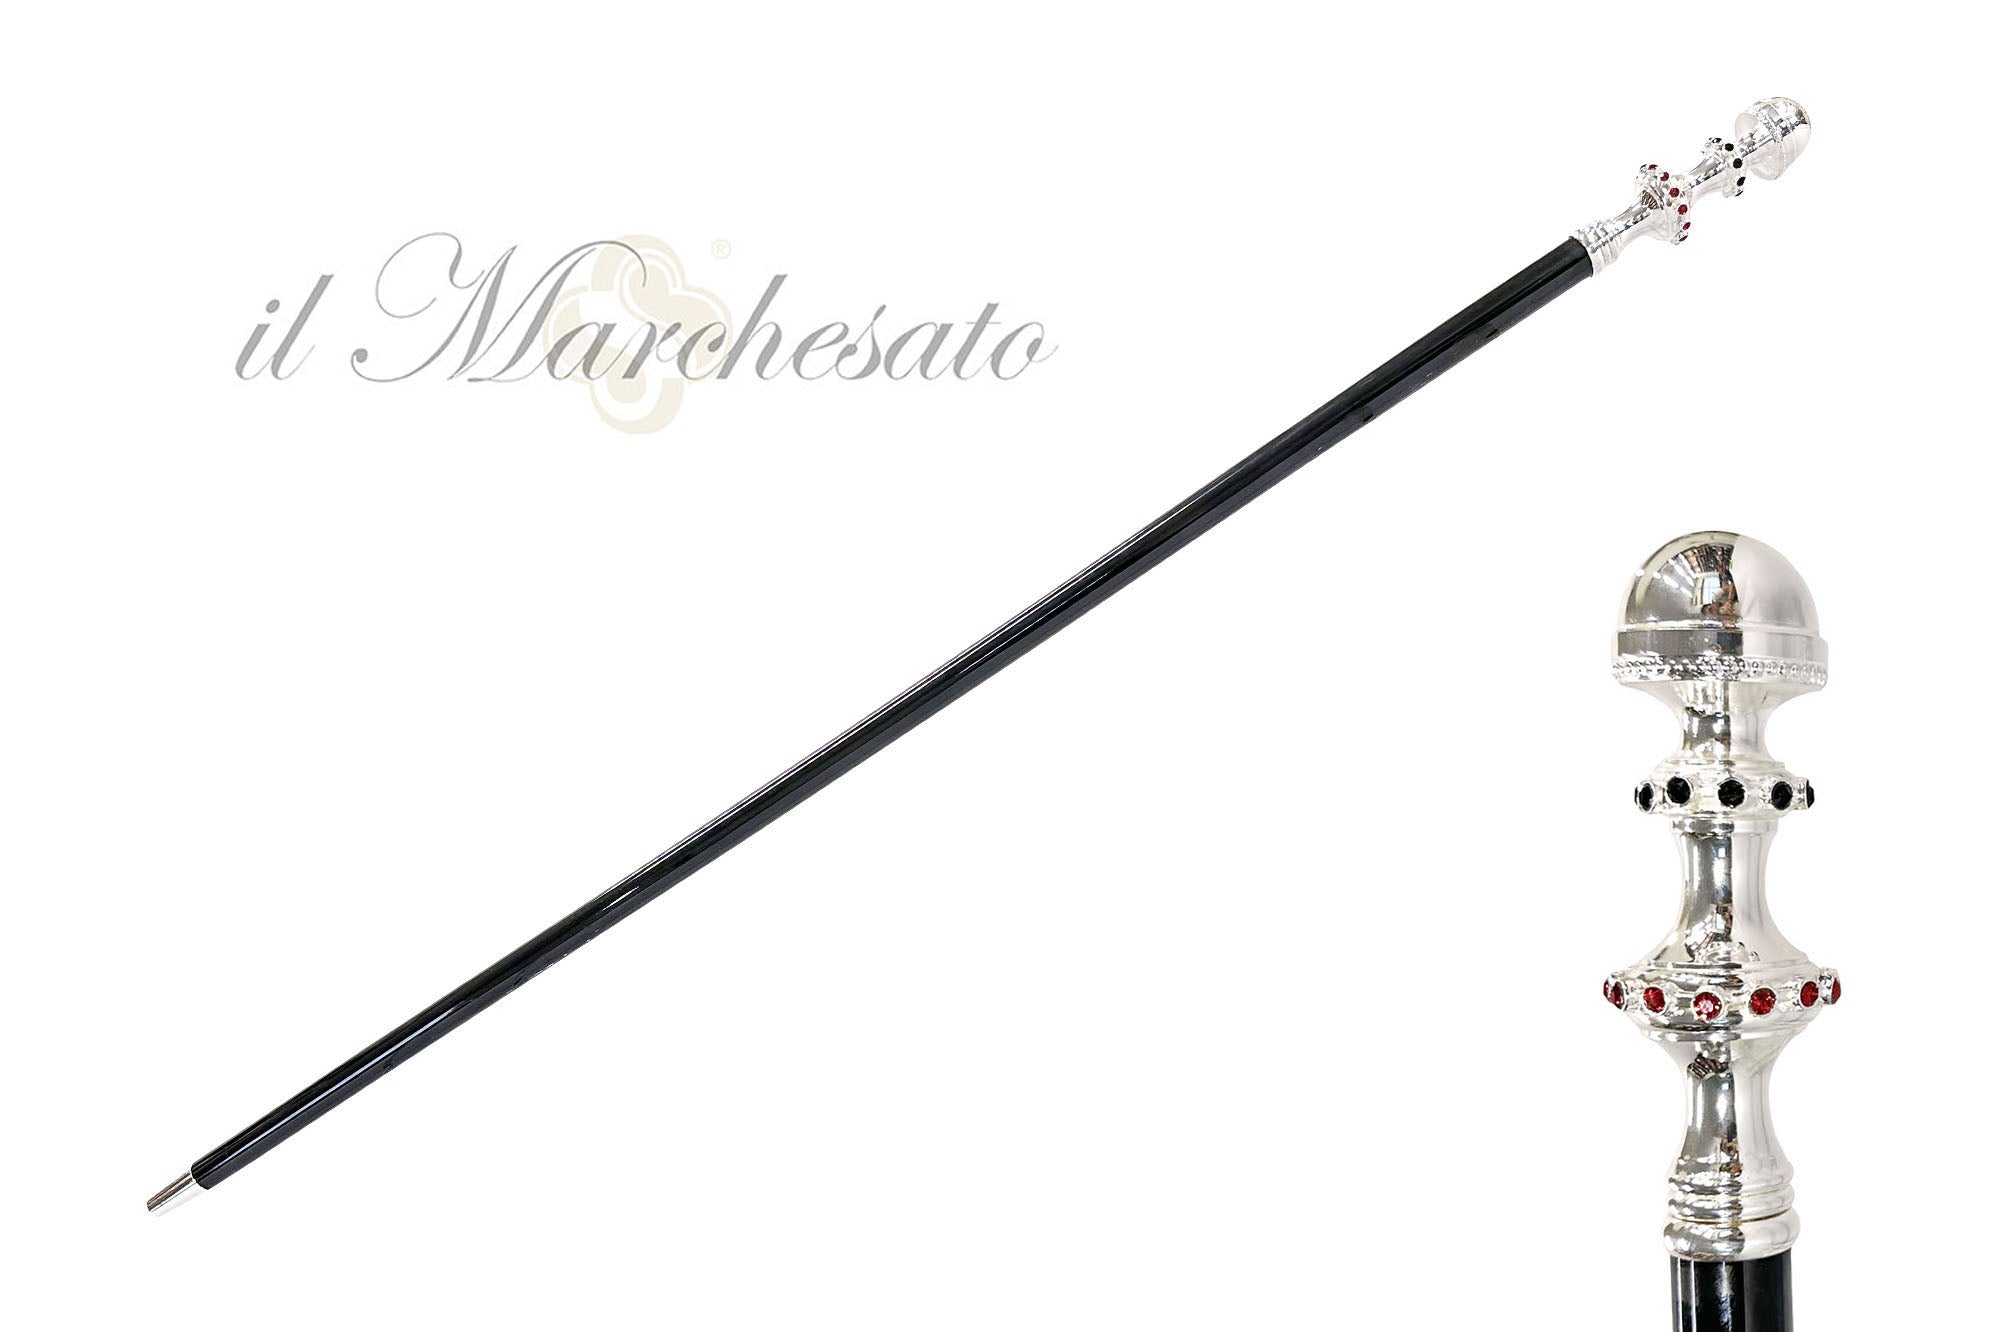 Mylord walking cane - Silverplated 925